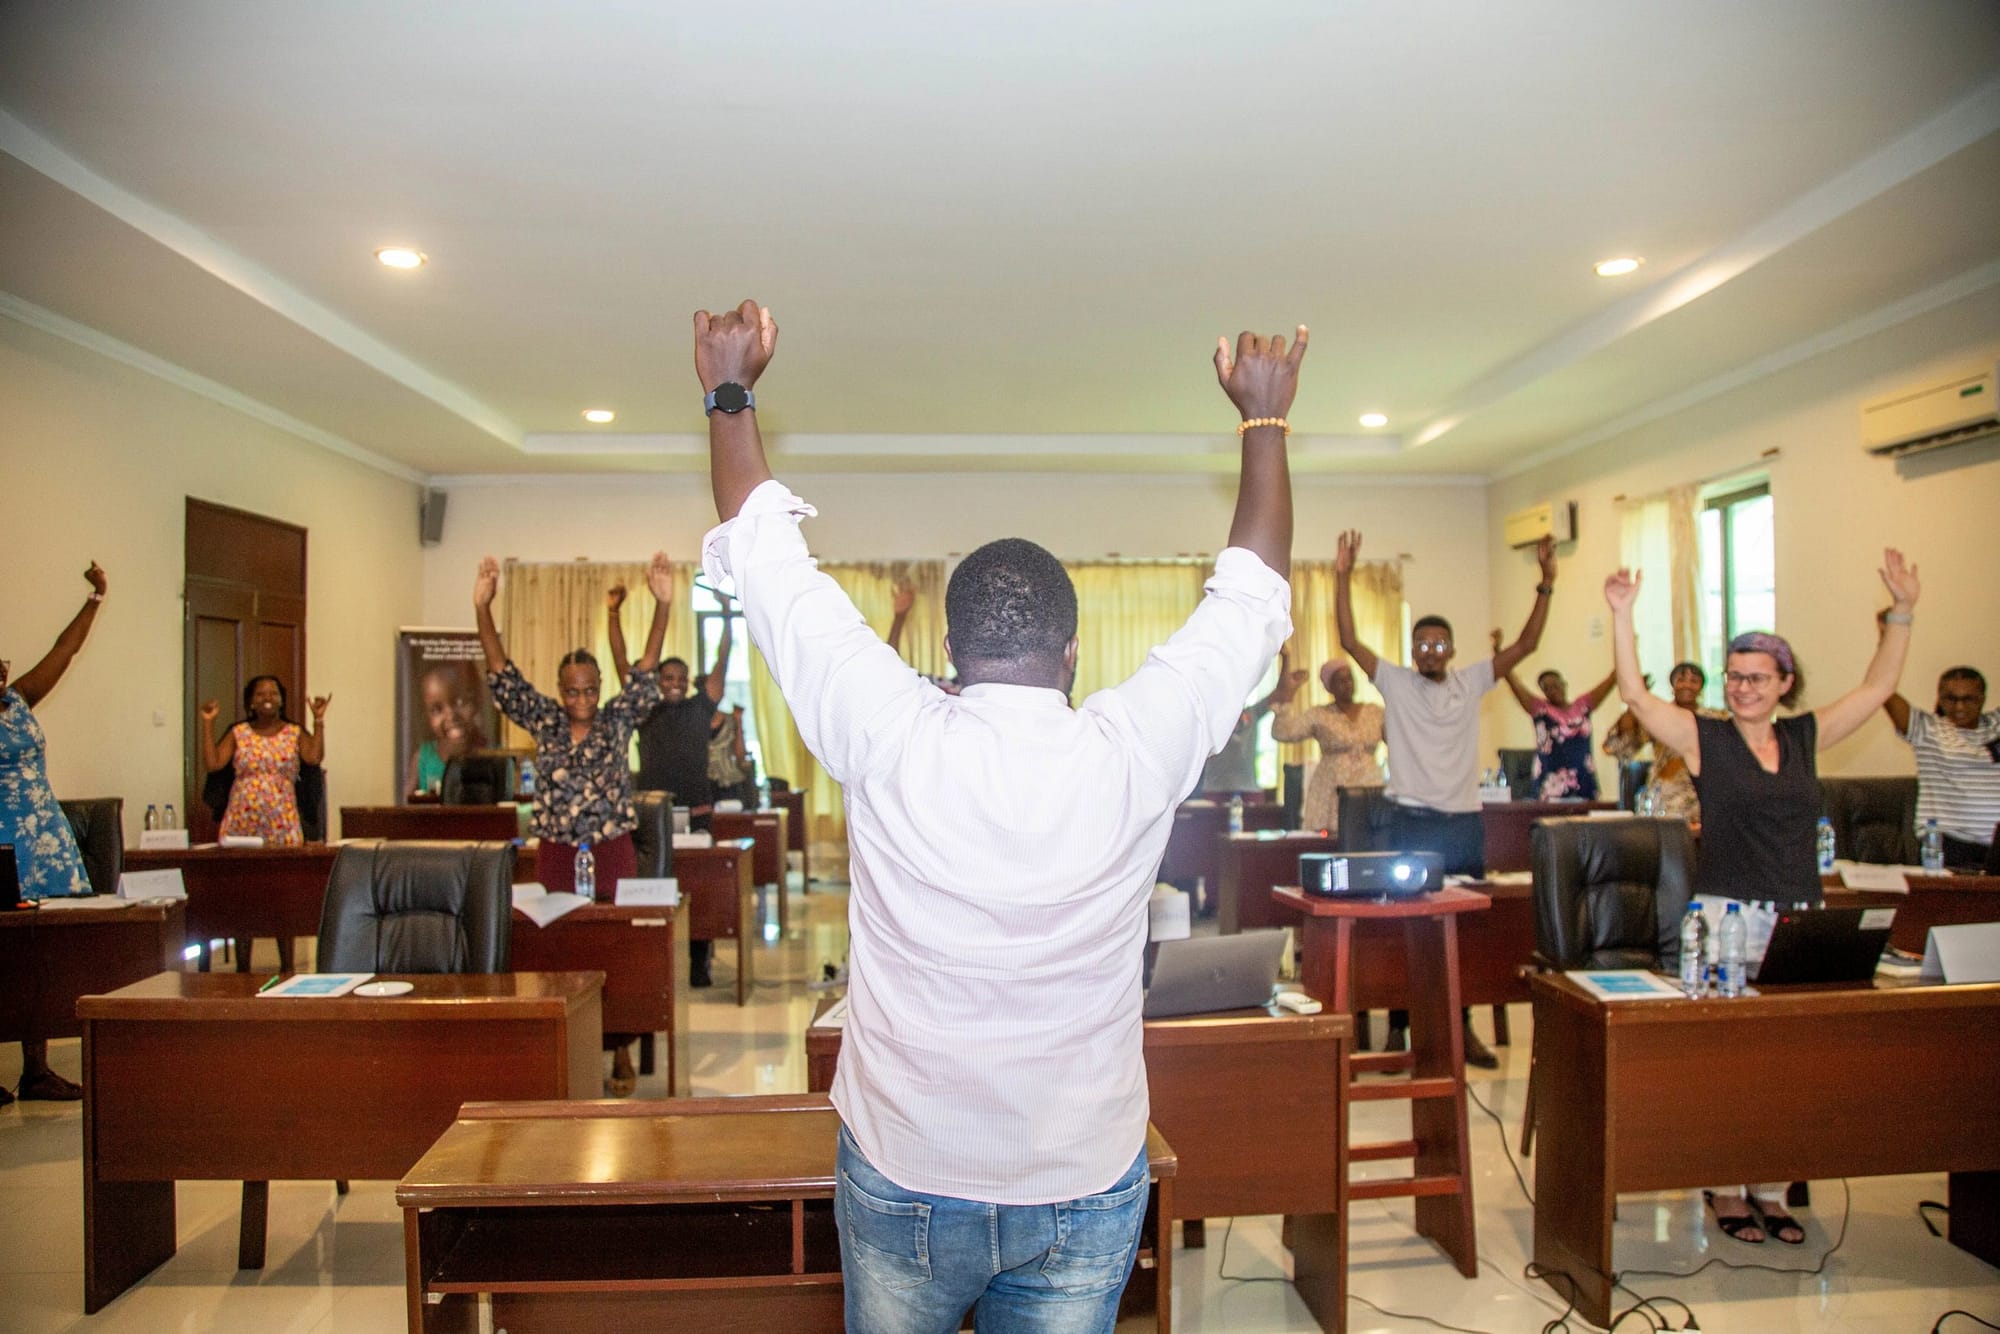 Man stands in front of a room of people with both hands raised